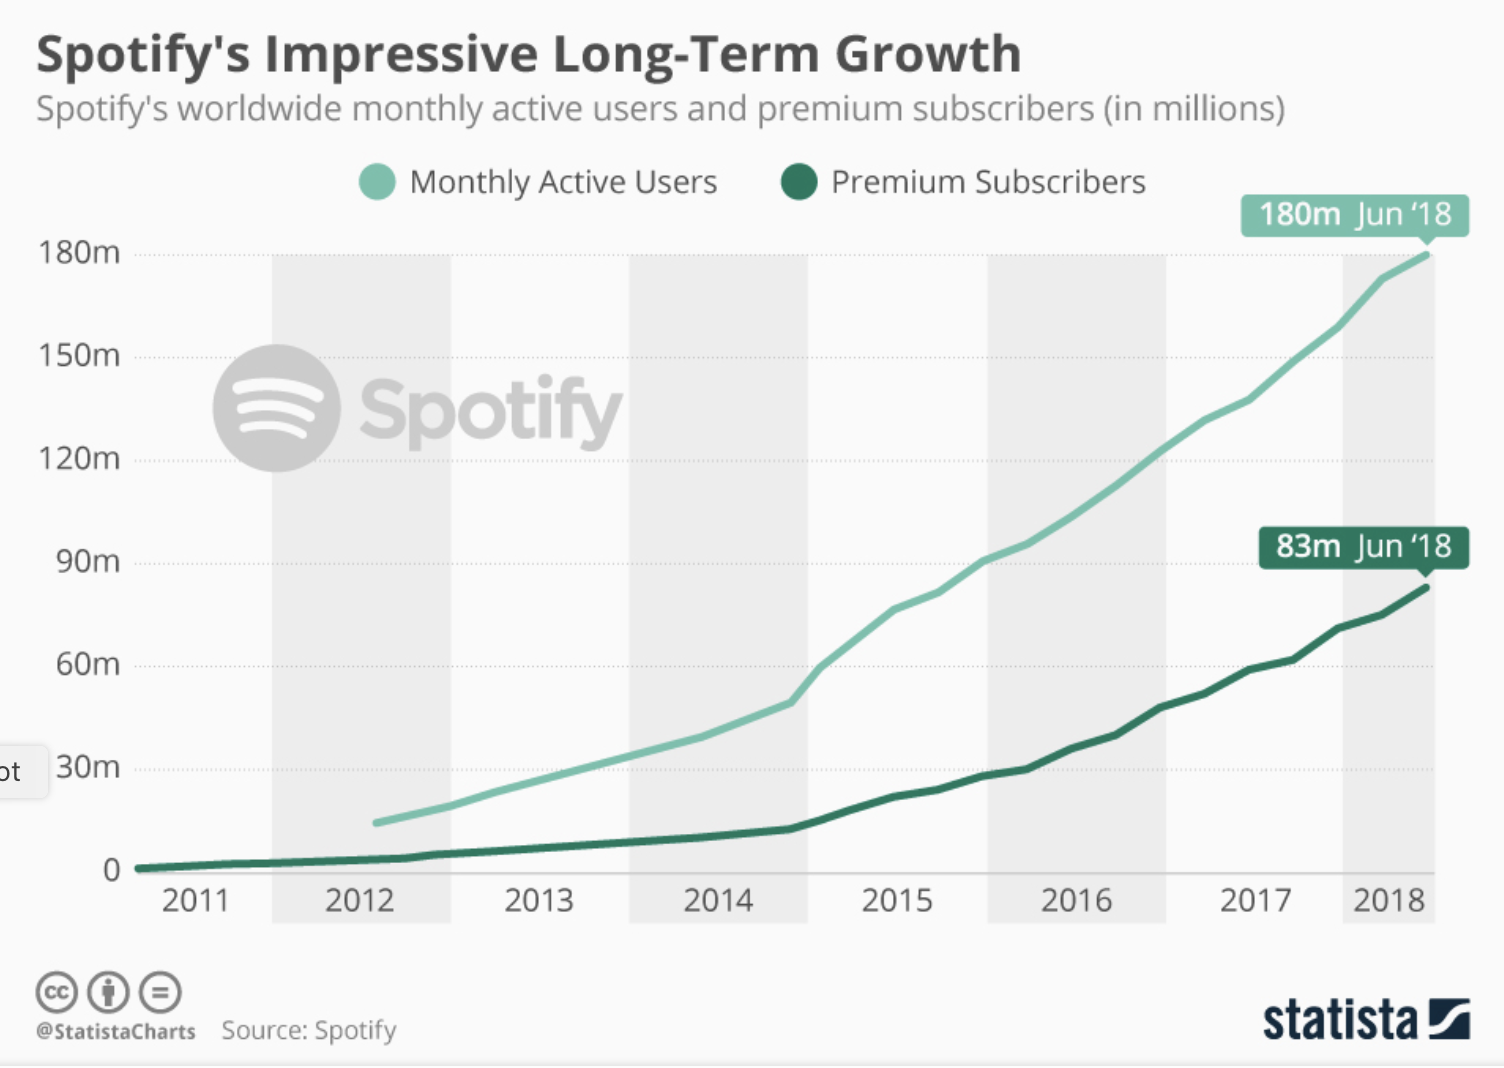 Spotify turns 10. Not everyone is wishing the company a happy birthday